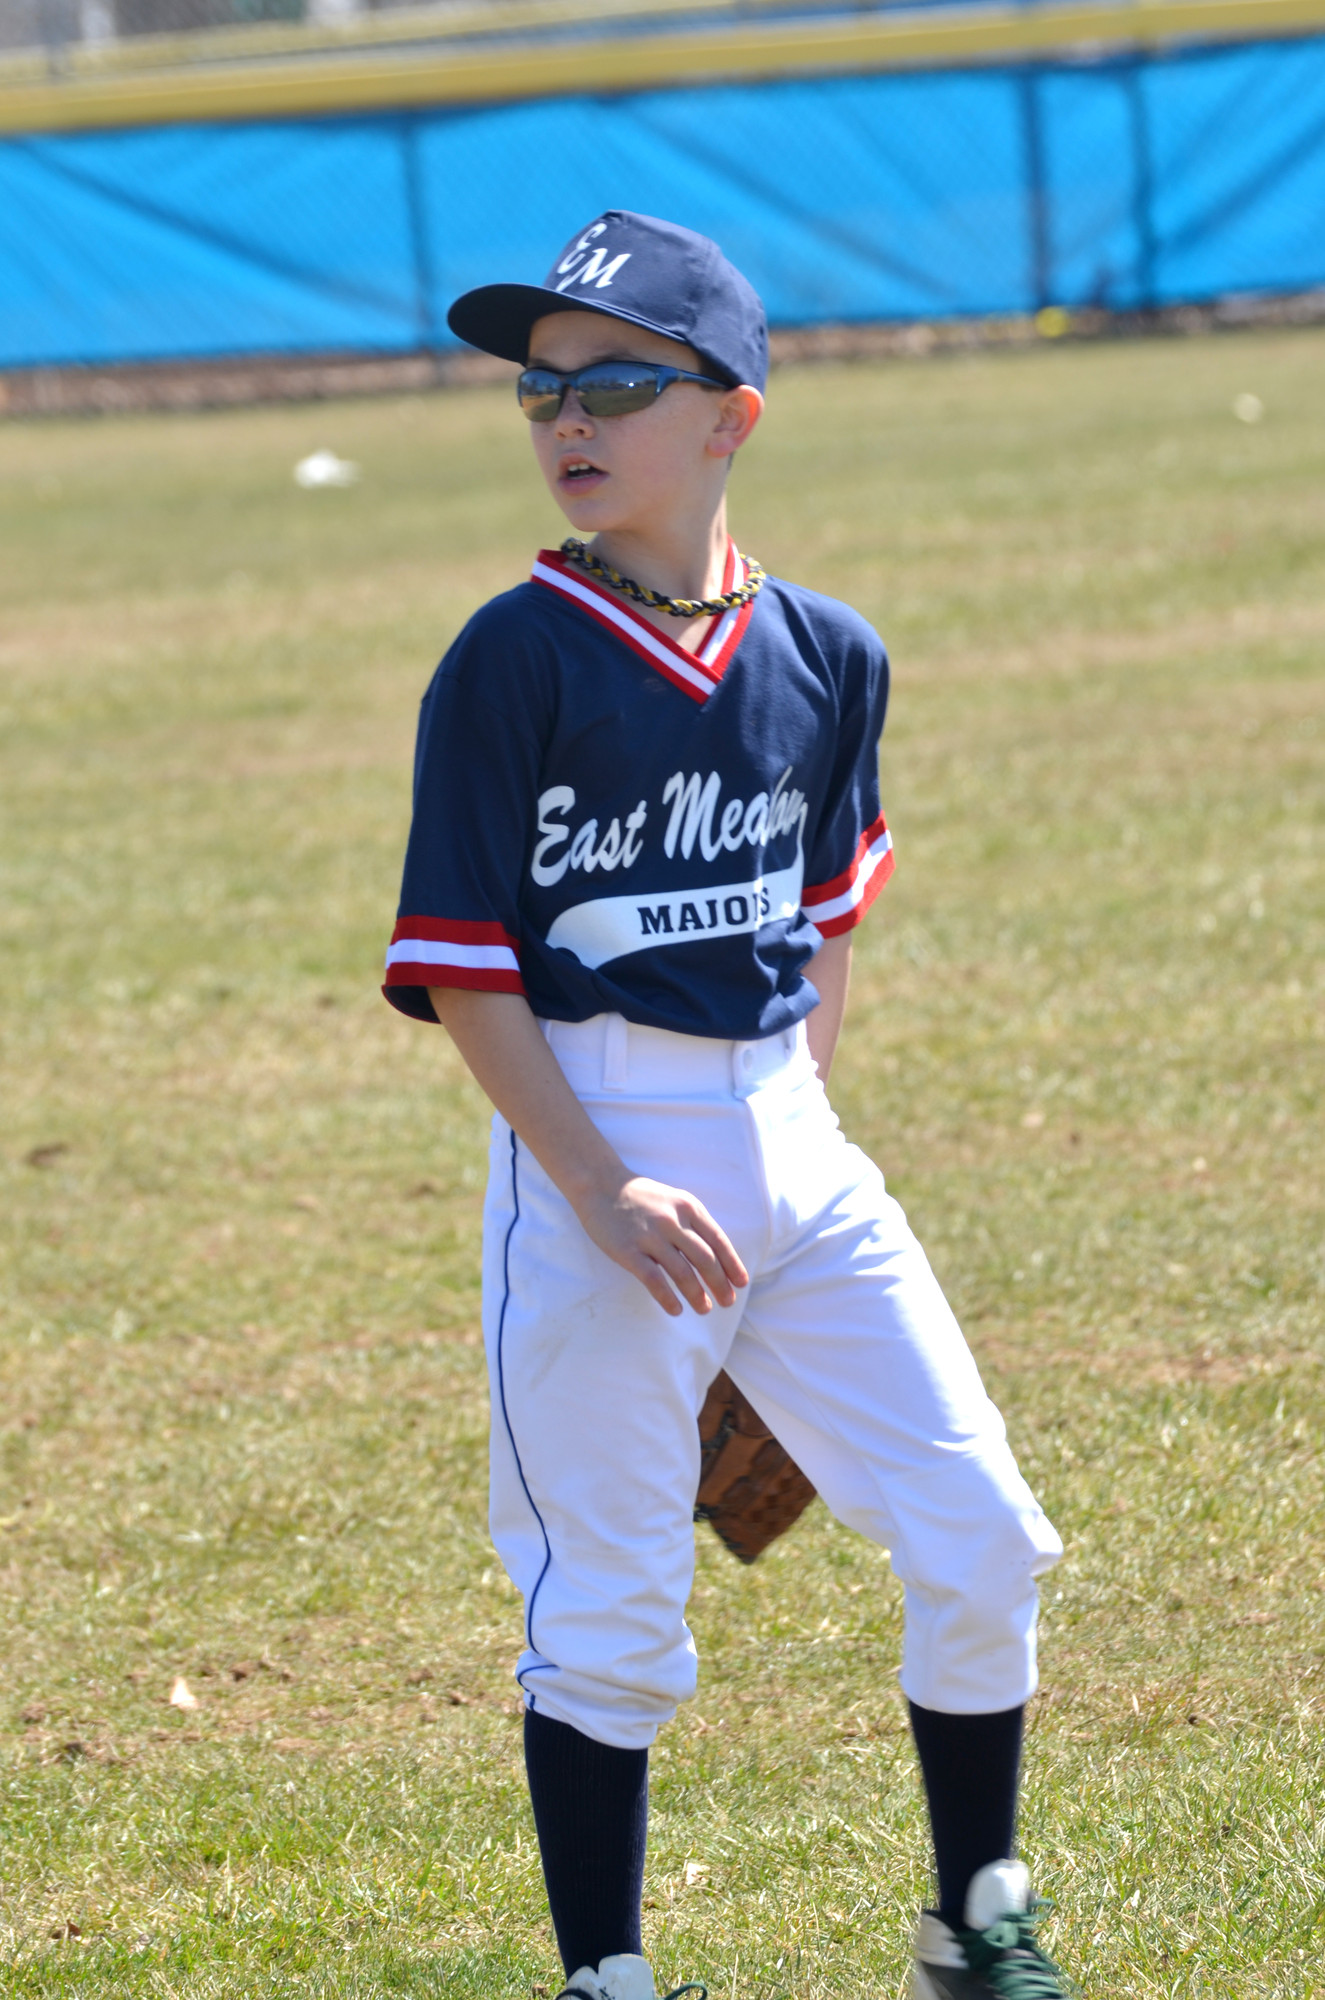 Jason Young, 12, was stylish at second base for East Meadow Baseball Majors Division.